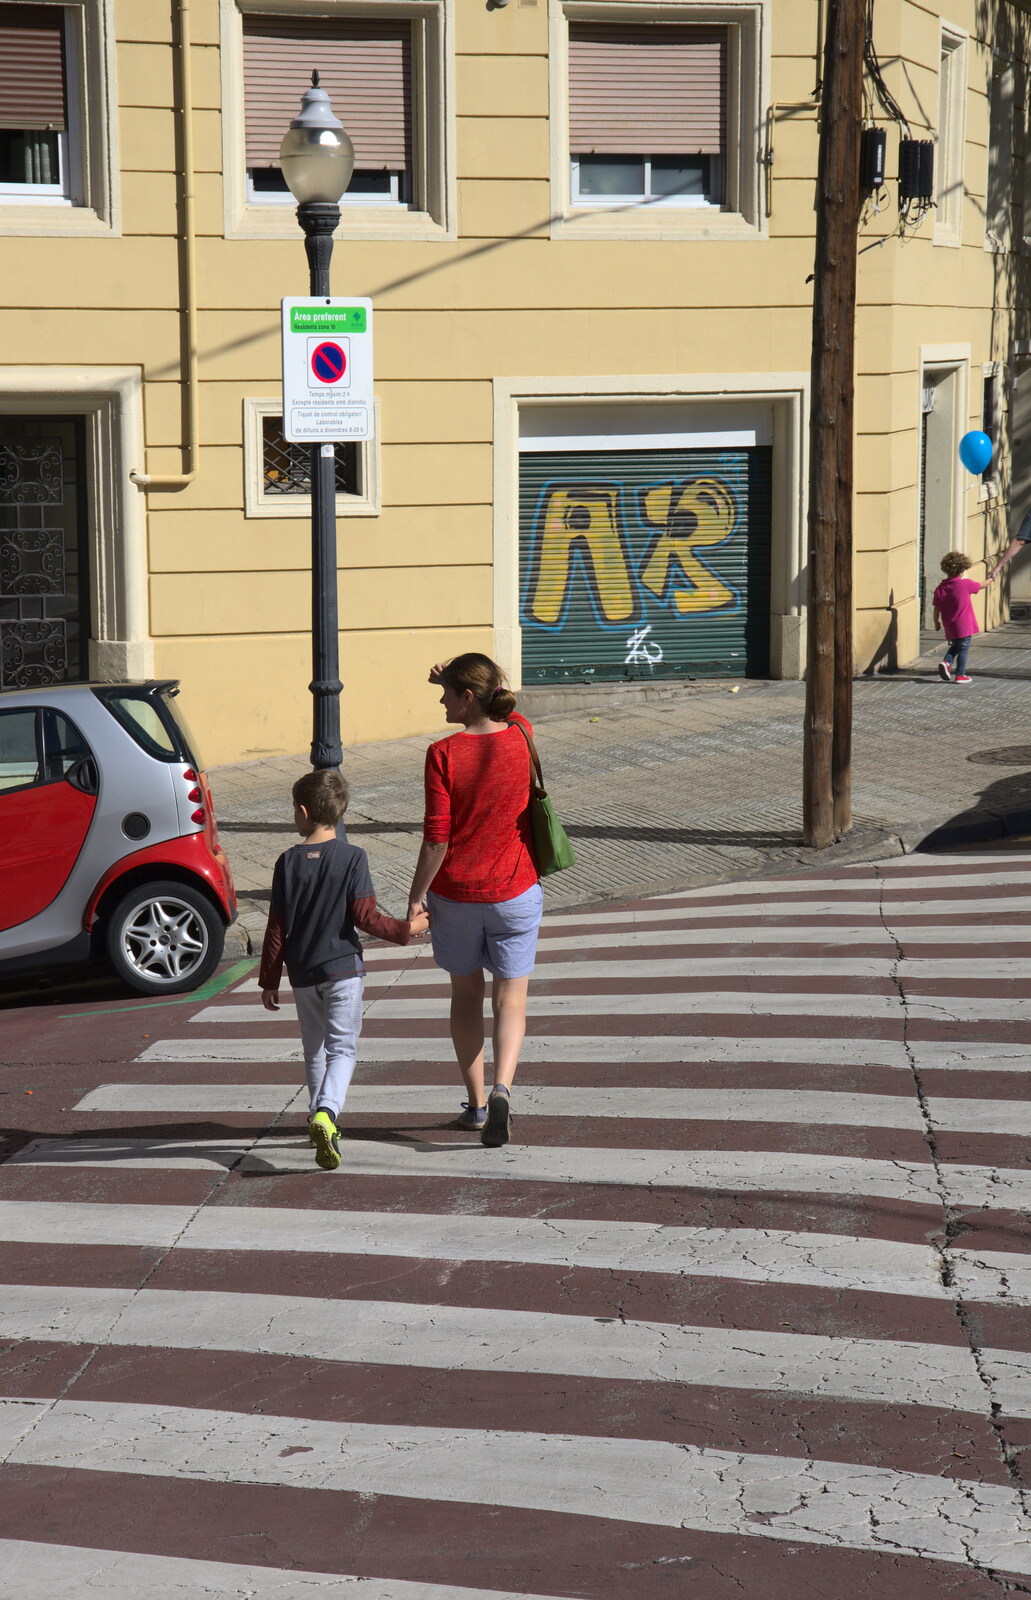 Fred and Isobel on a zebra crossing from Barcelona and Parc Montjuïc, Catalonia, Spain - 21st October 2017